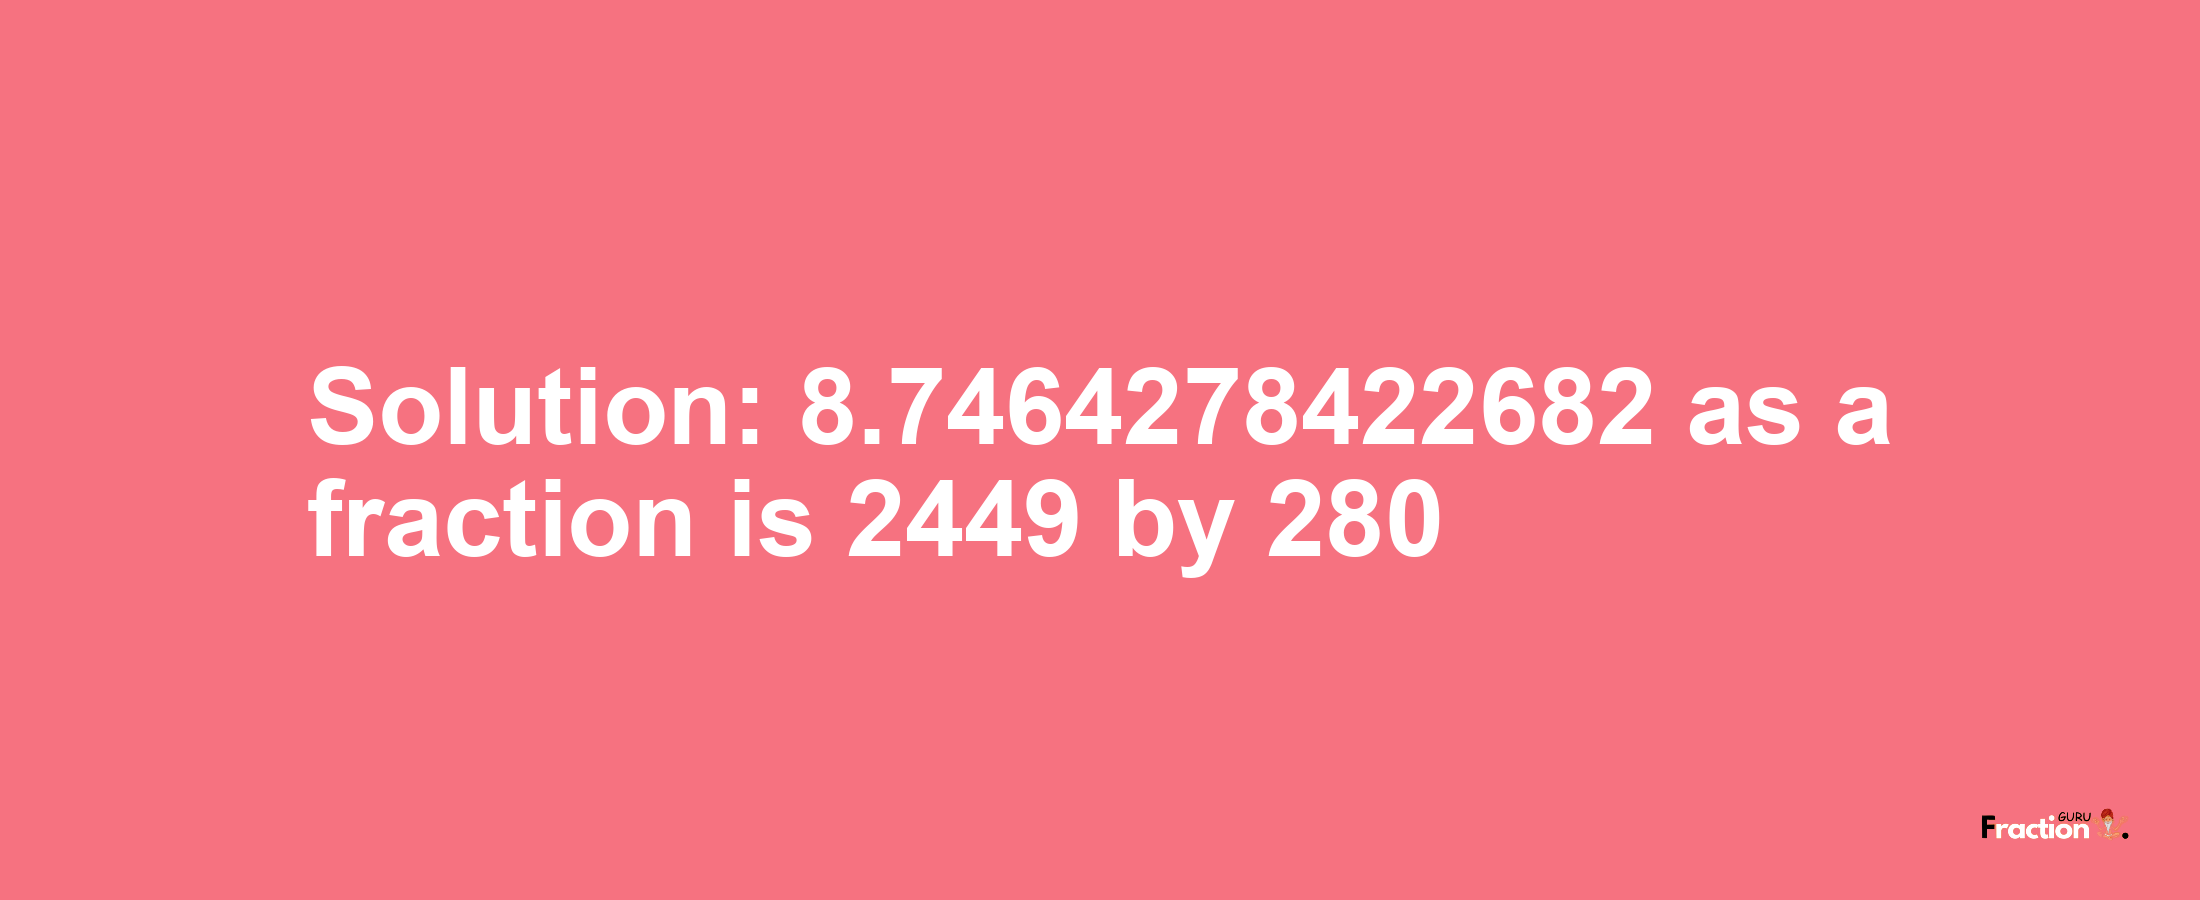 Solution:8.7464278422682 as a fraction is 2449/280